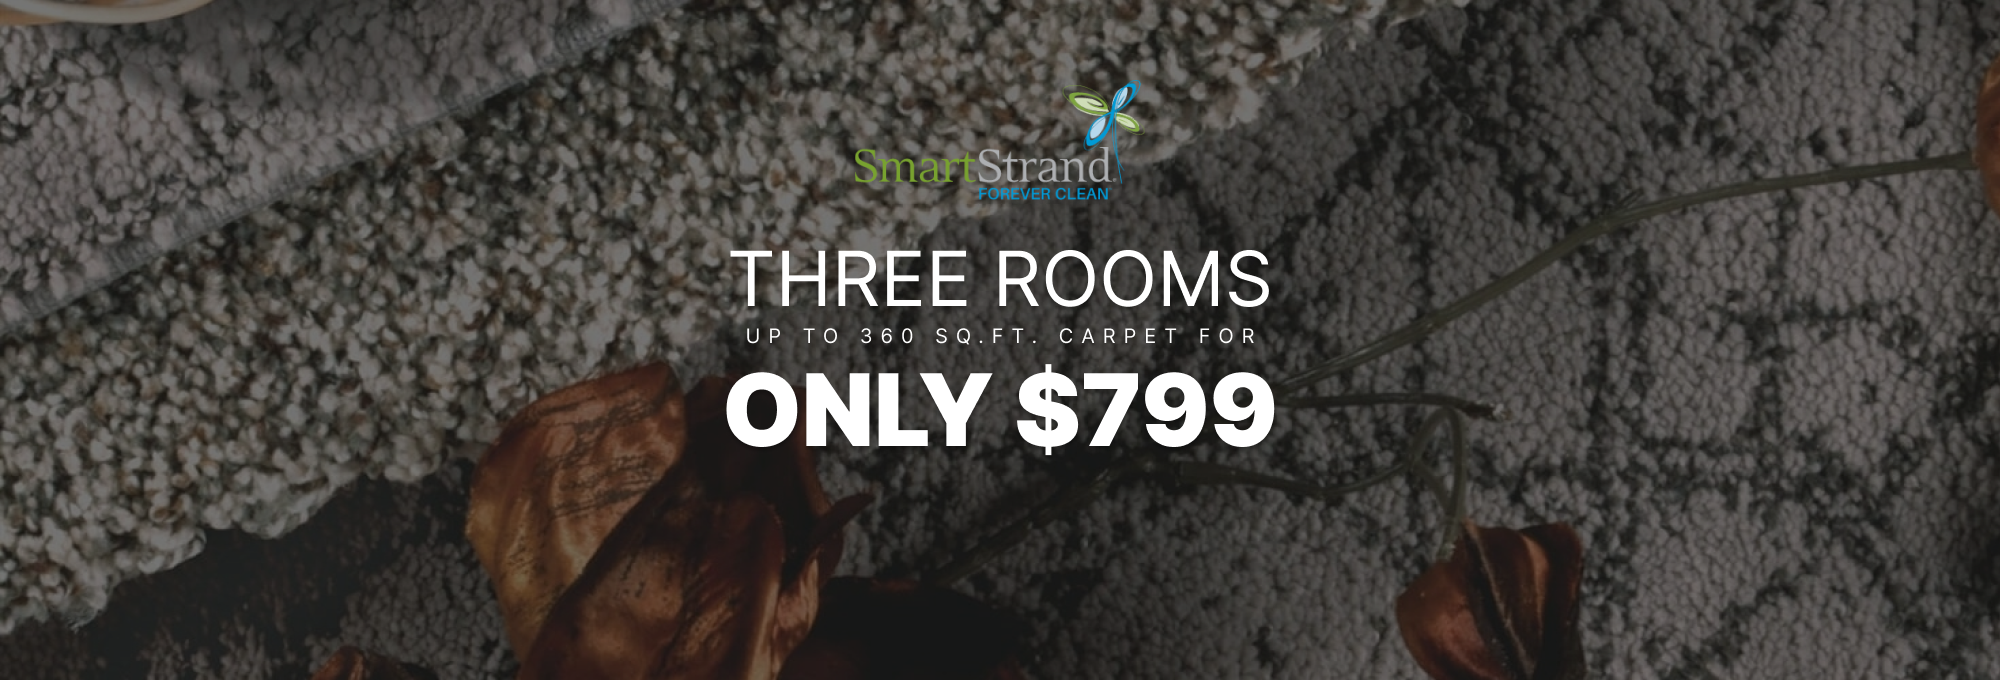 Up to 3 rooms of carpet for only $799, free pad and installation! Browse carpet.